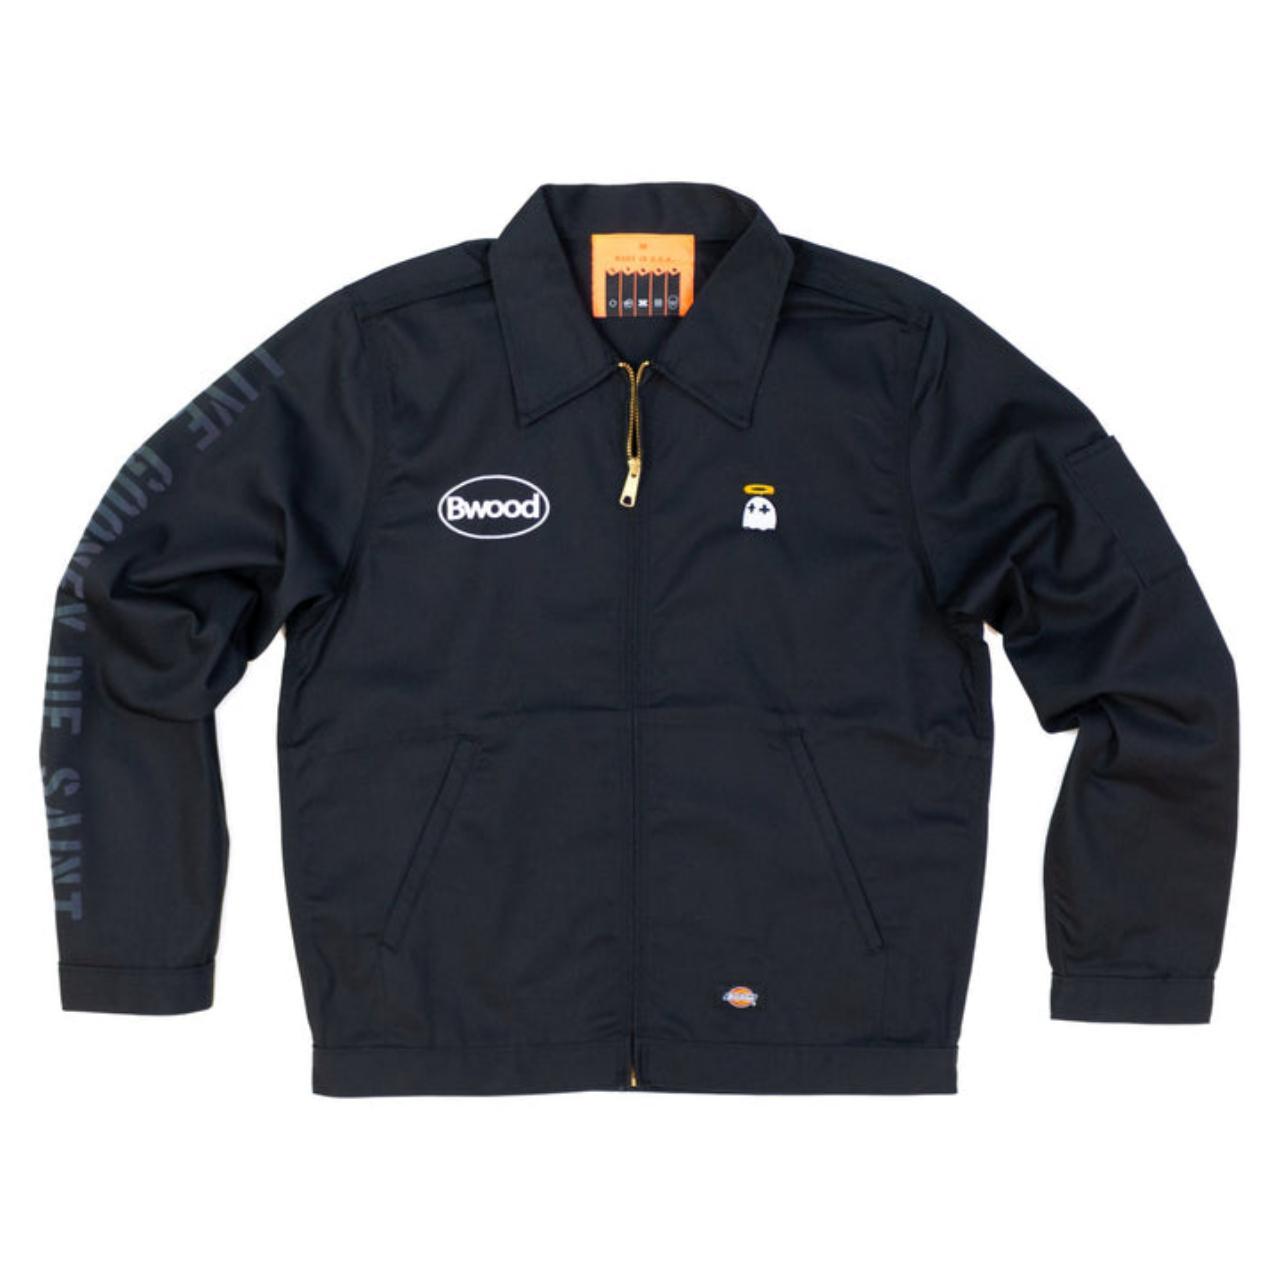 Bwood Kills , This unlined dickies jacket is great...